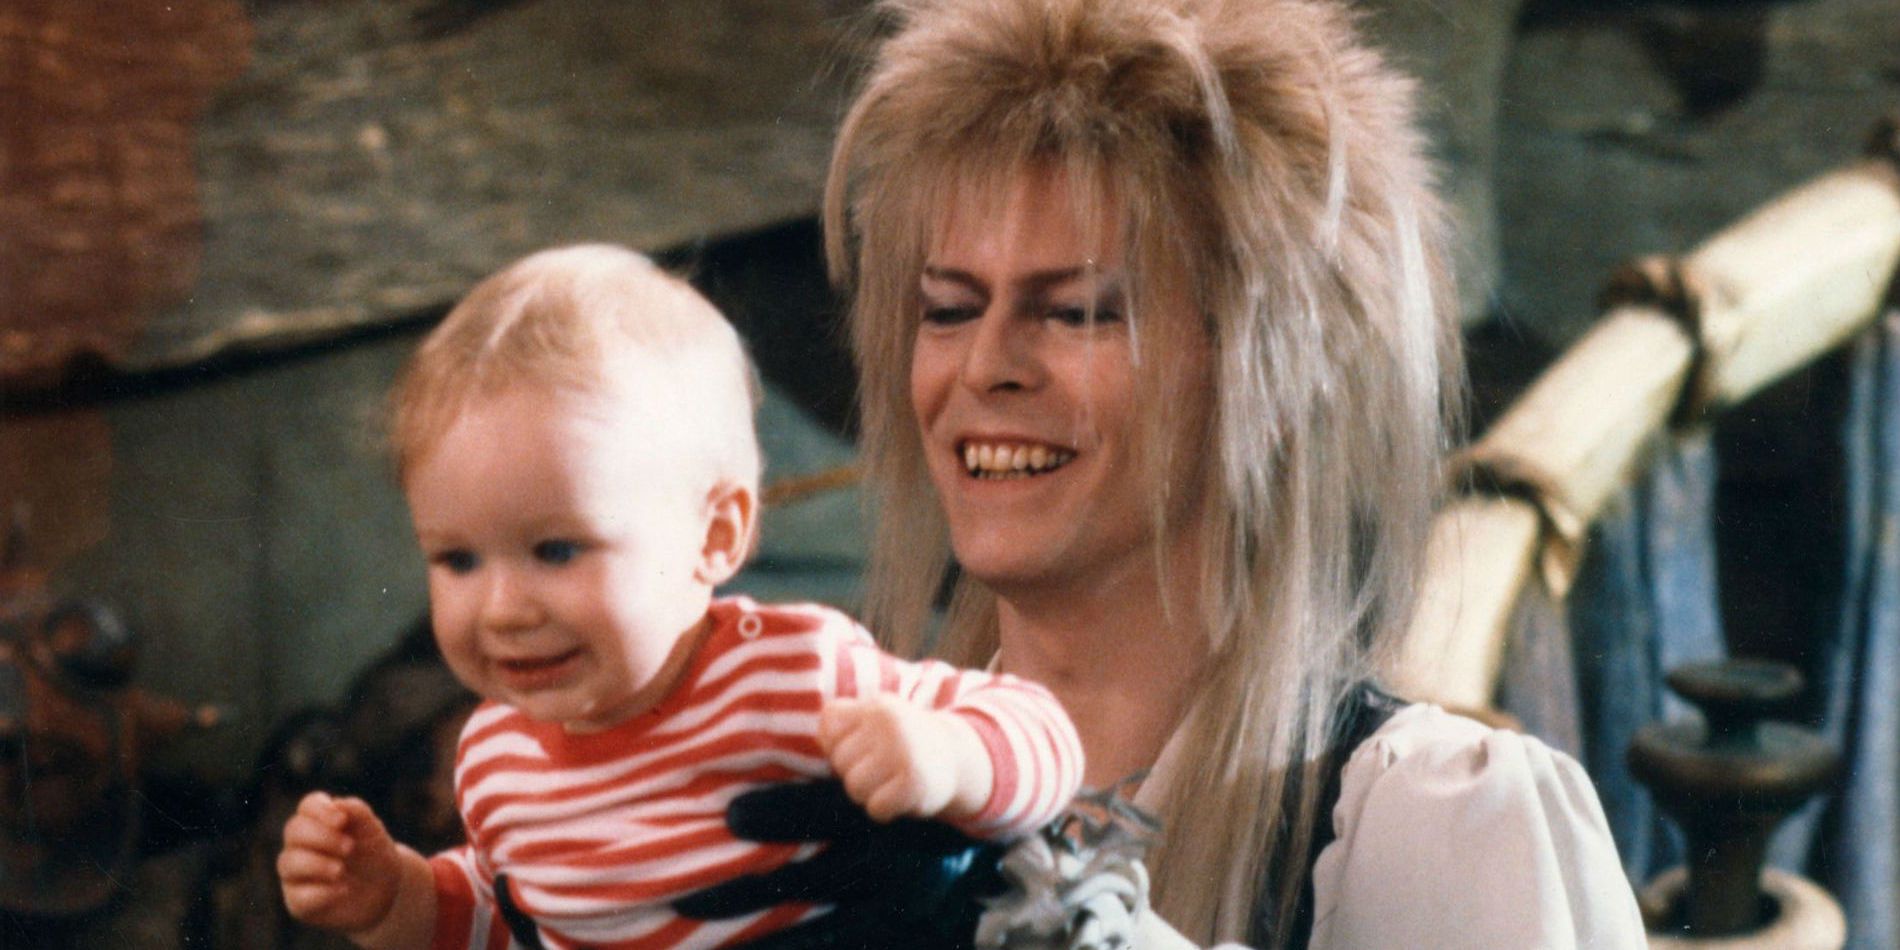 Jareth holding Toby in Labyrinth.